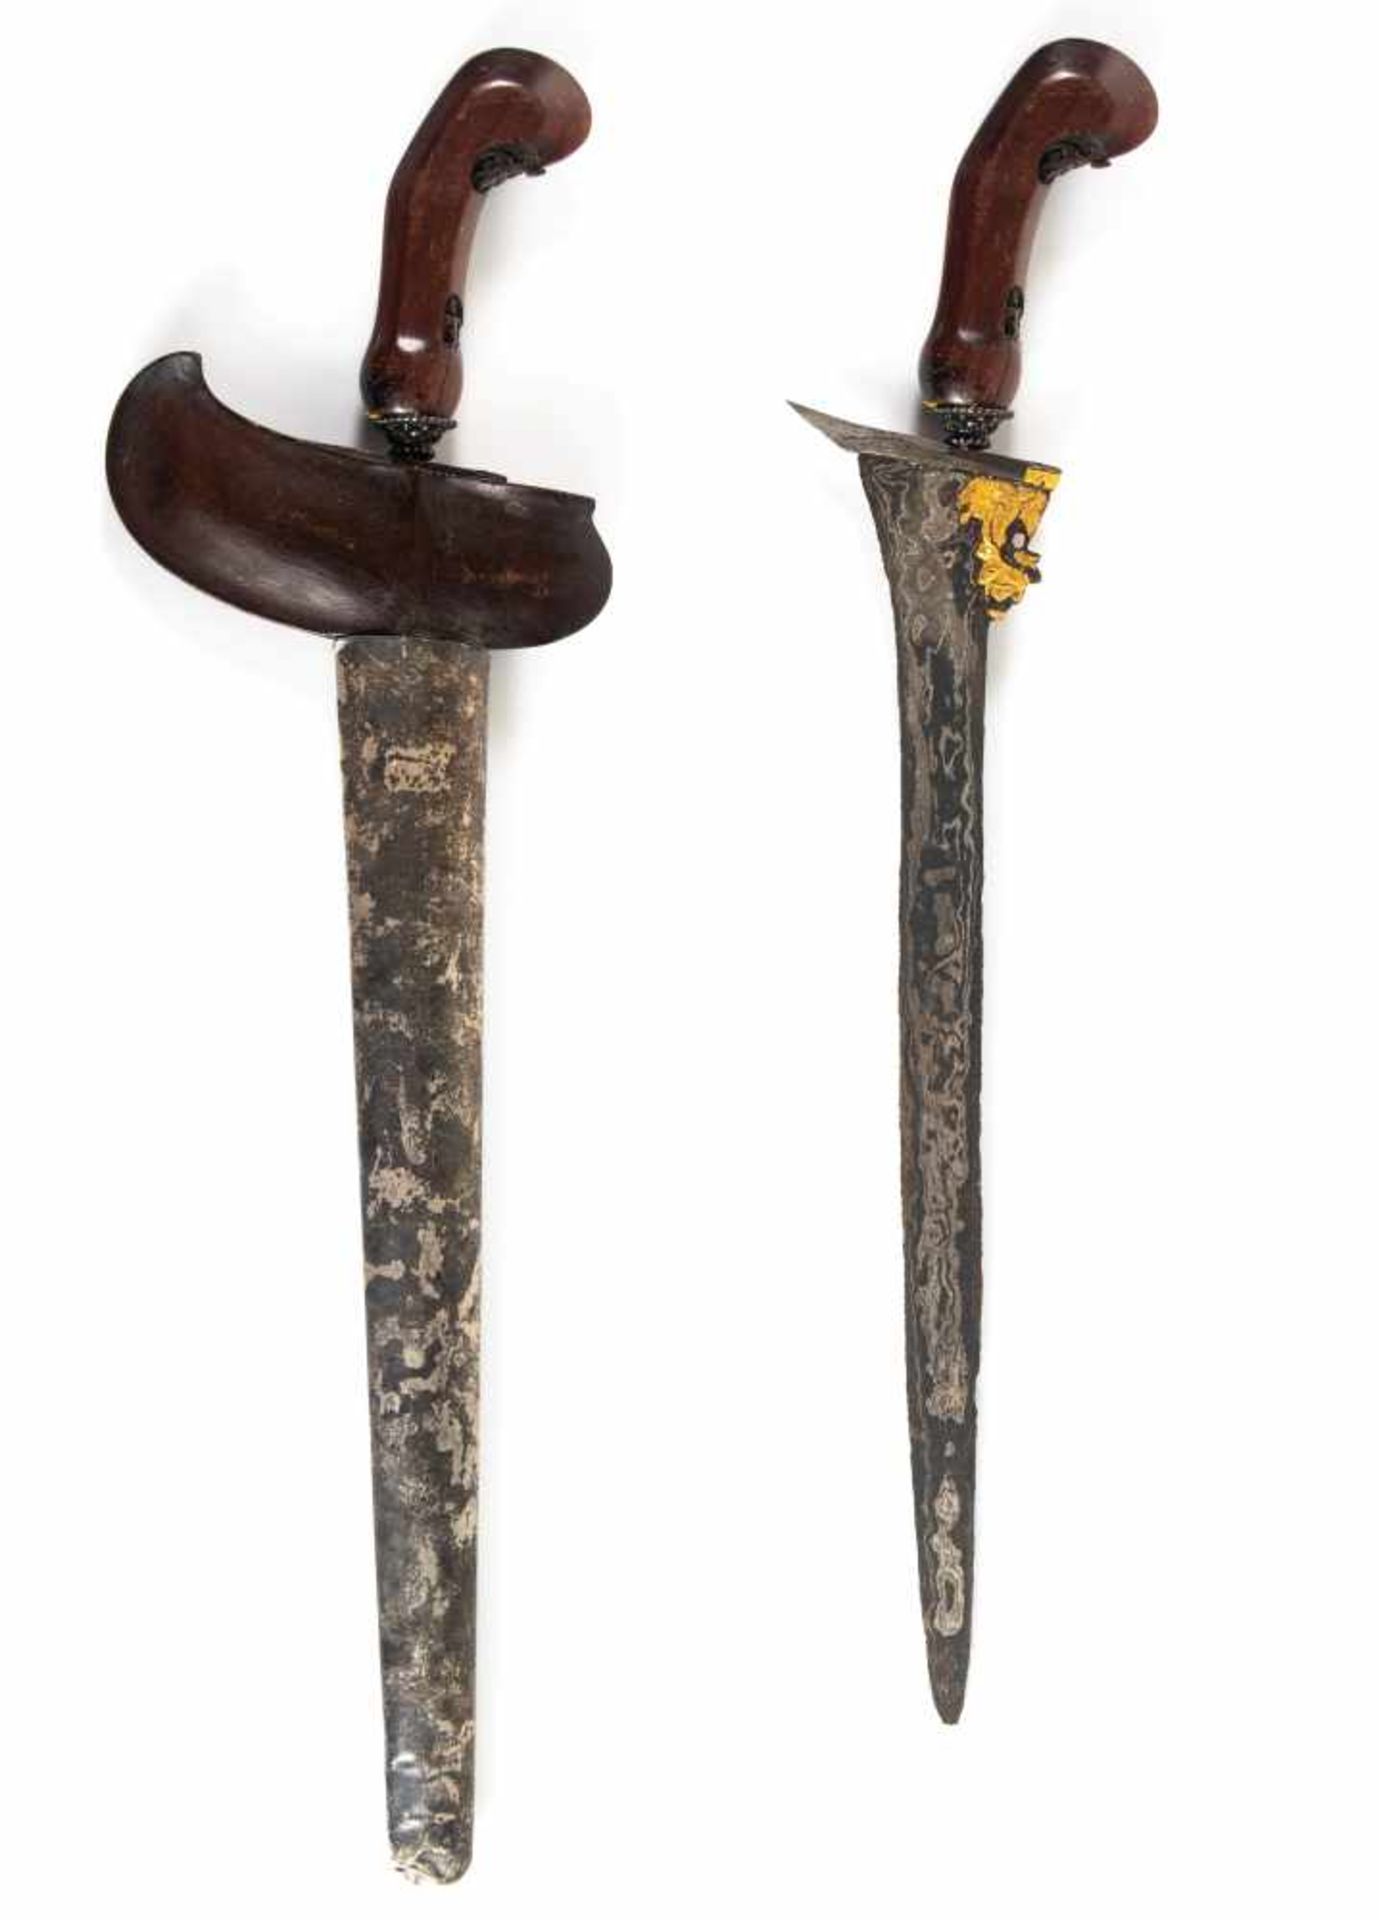 A Javanese Keris, with early 17th century blade.A Javanese Keris, with early 17th century blade. - Image 7 of 7